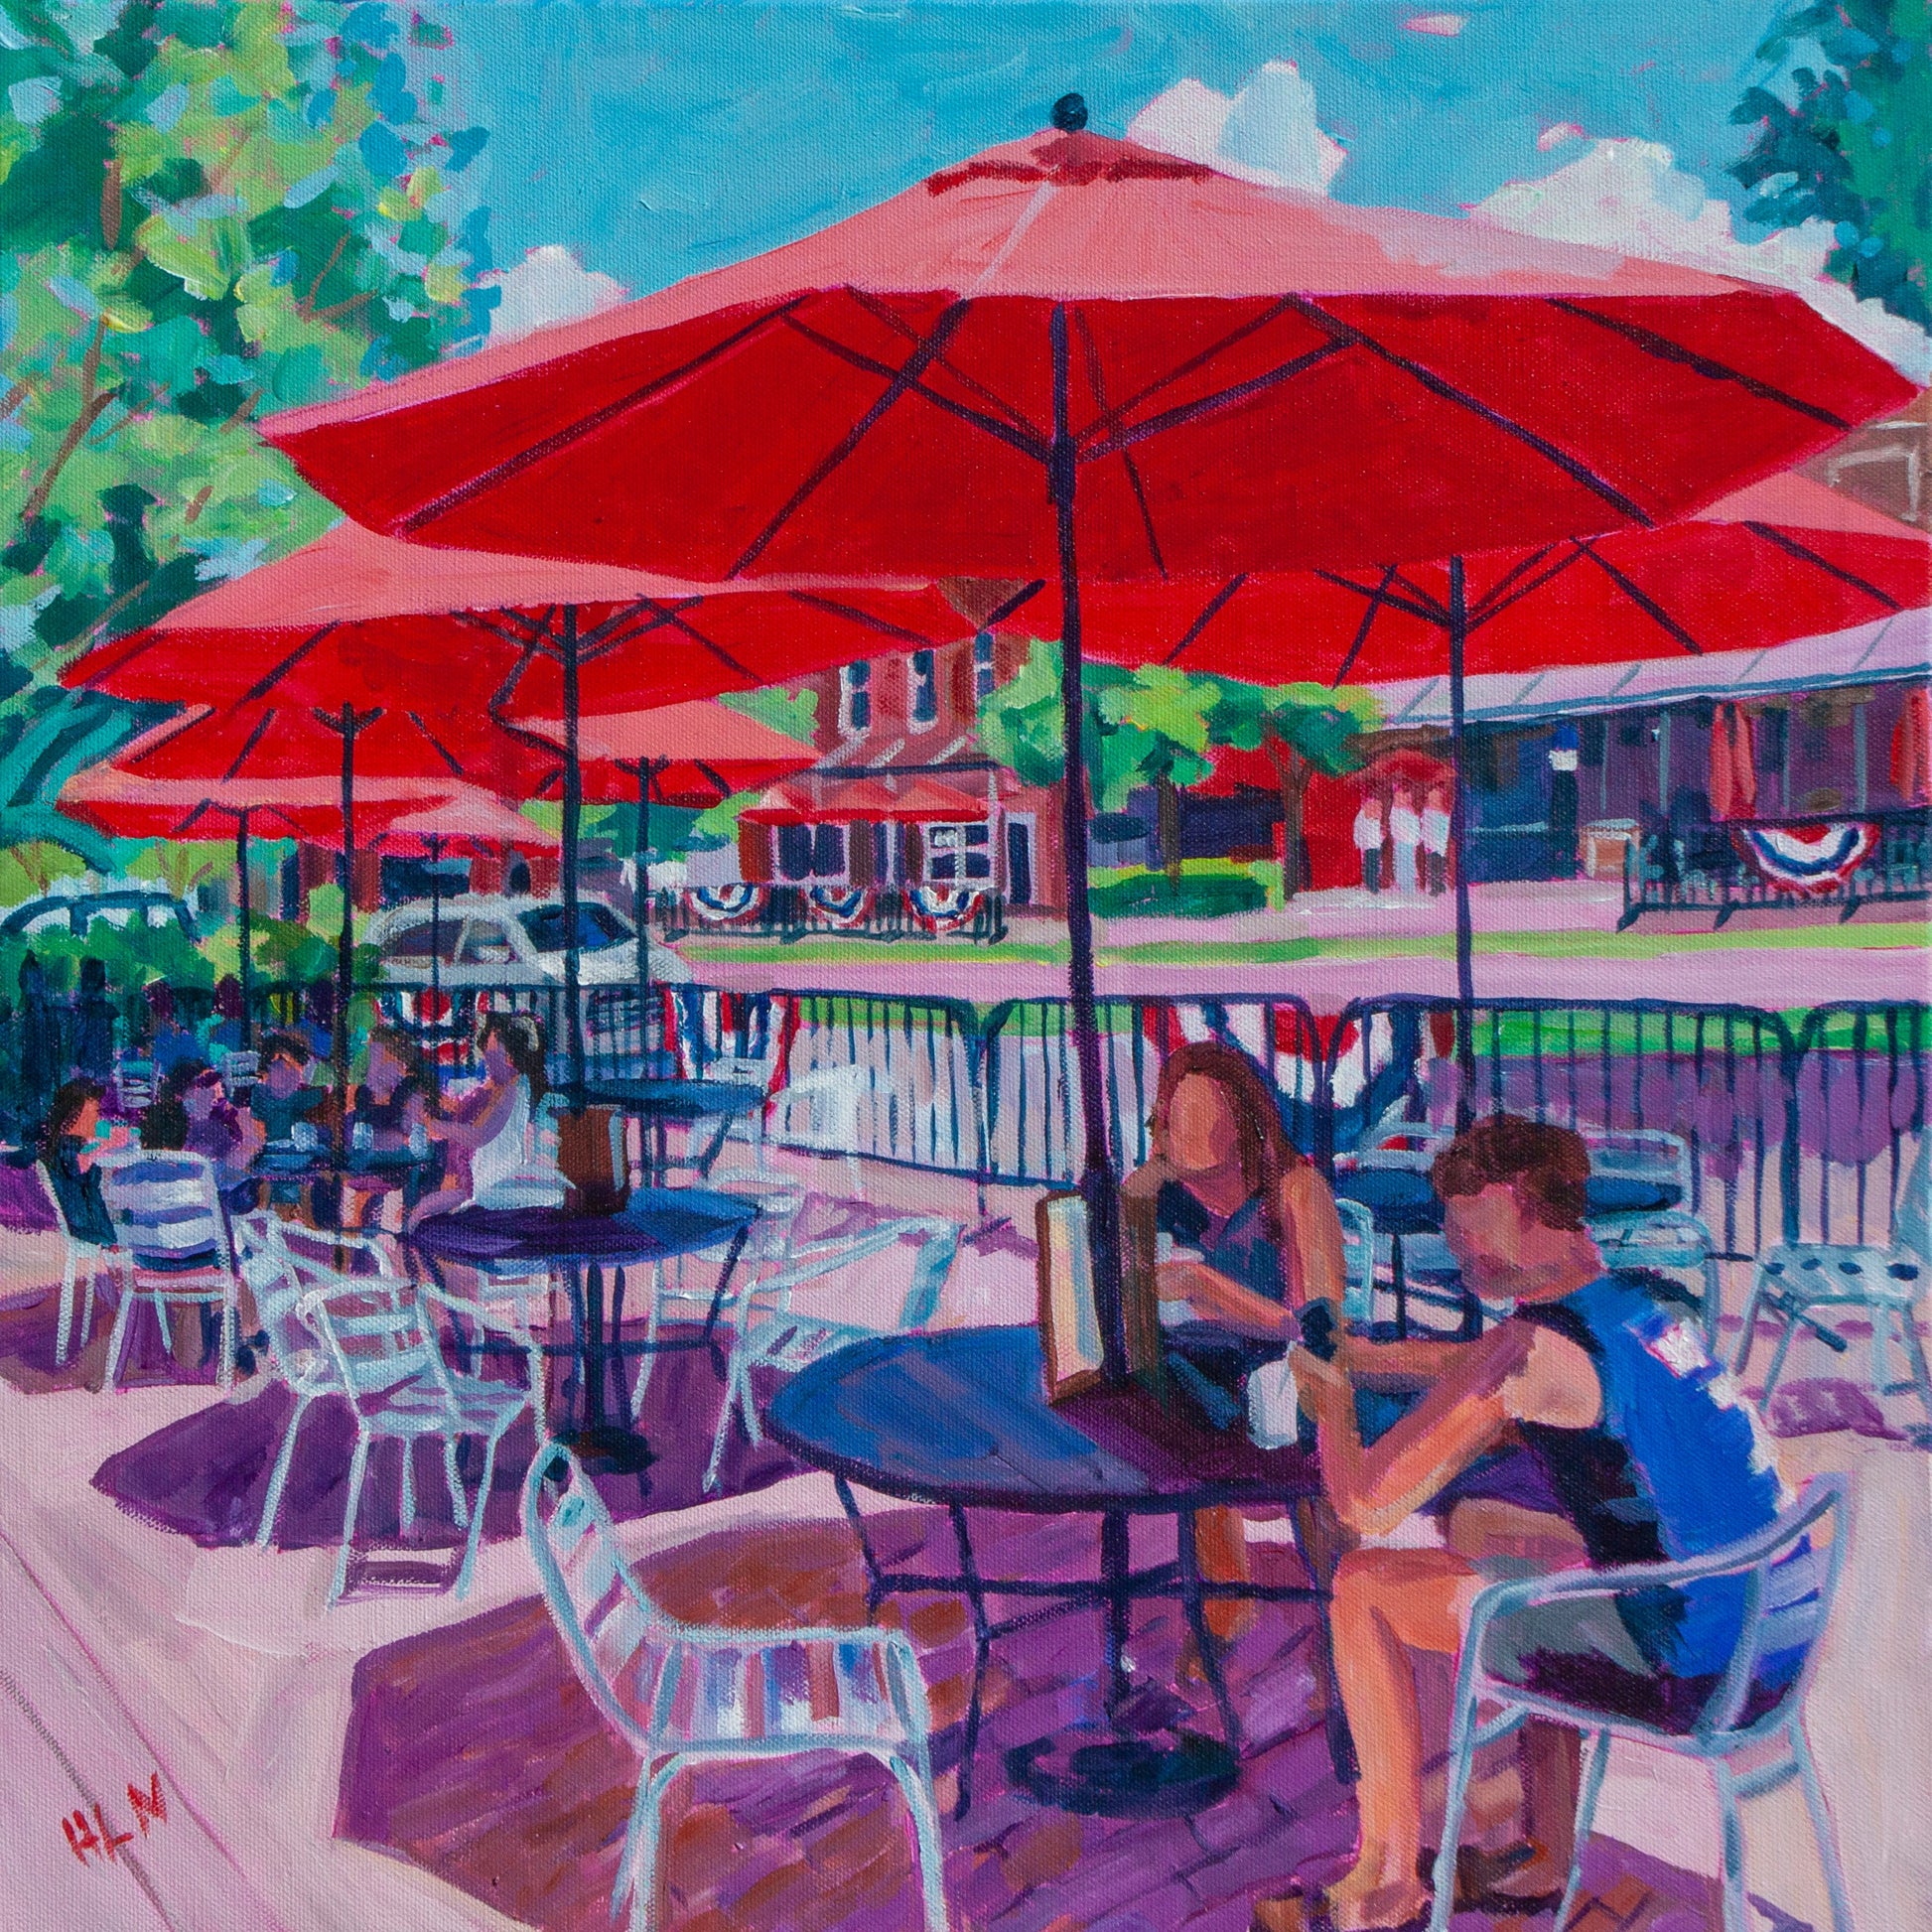 Original vibrant  impressionistic painting of Cafe setting on Plant Street Winter Garden  Florida with red umbrellas along the street